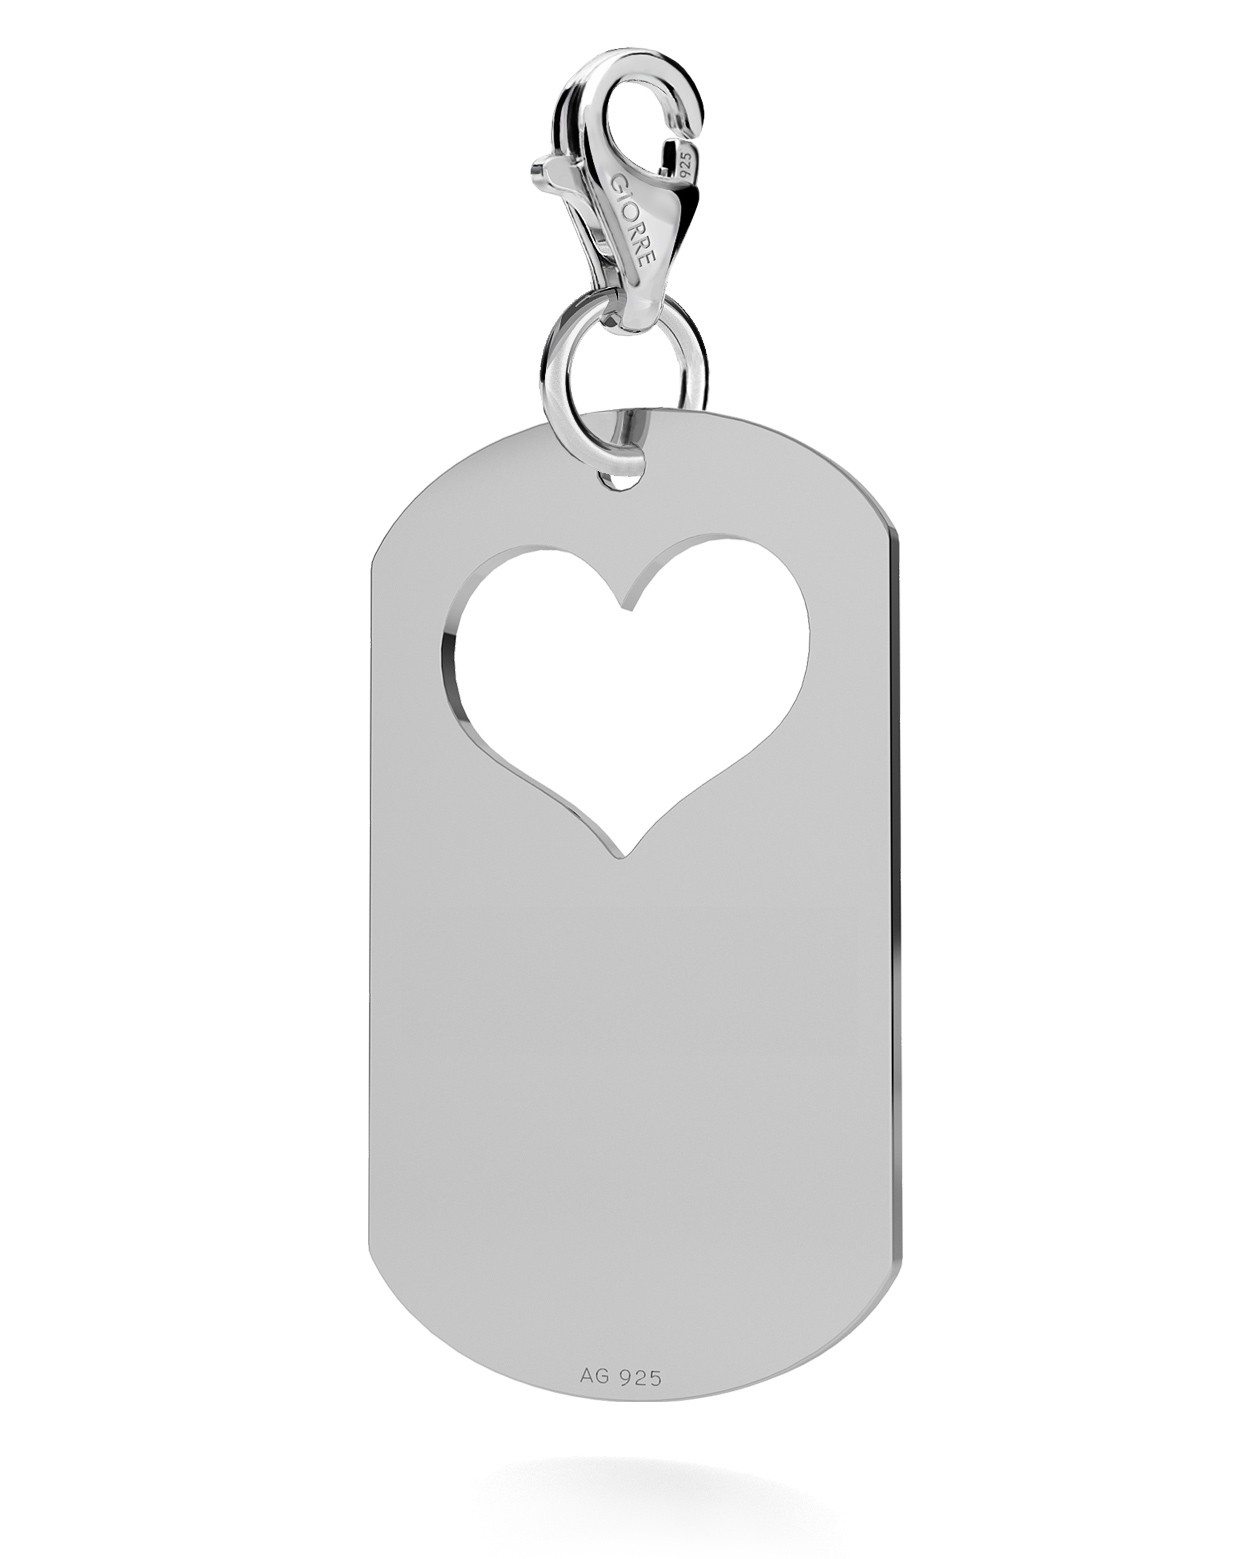 CHARM 76, HEART DOG TAG WITH ENGRAVE SILVER 925, RHODIUM OR GOLD PLATED